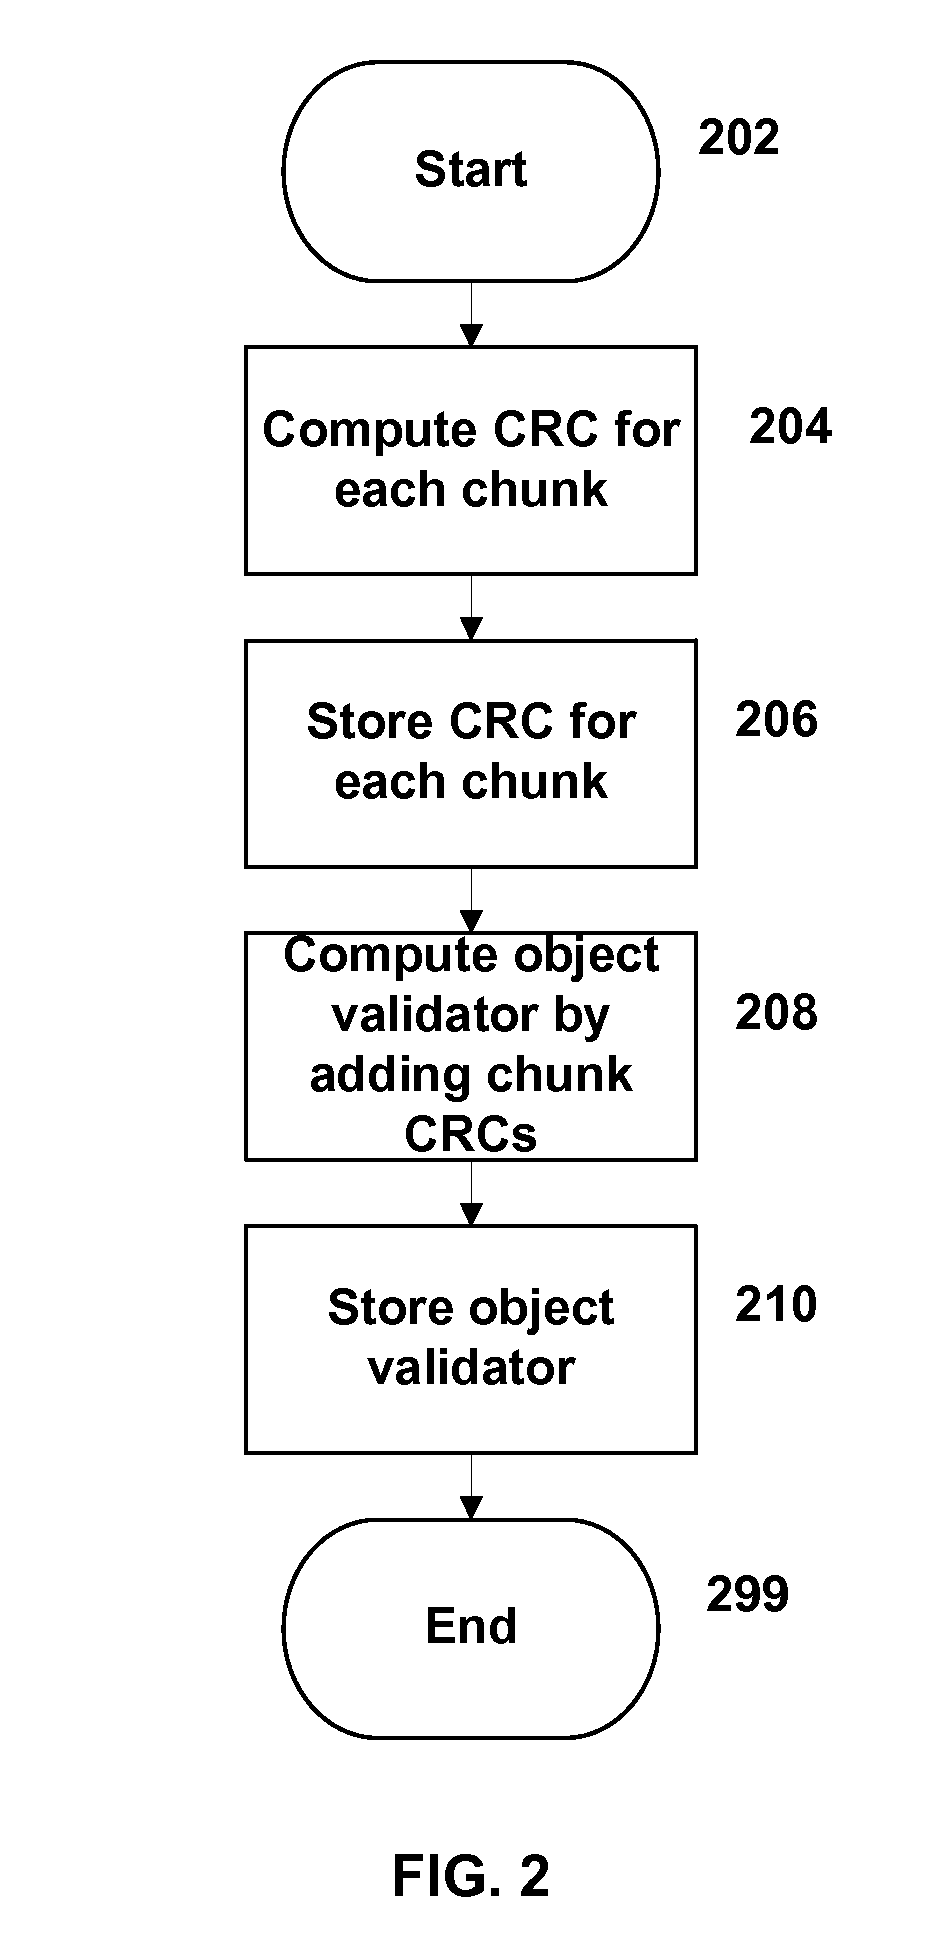 Validating objects in a data storage system